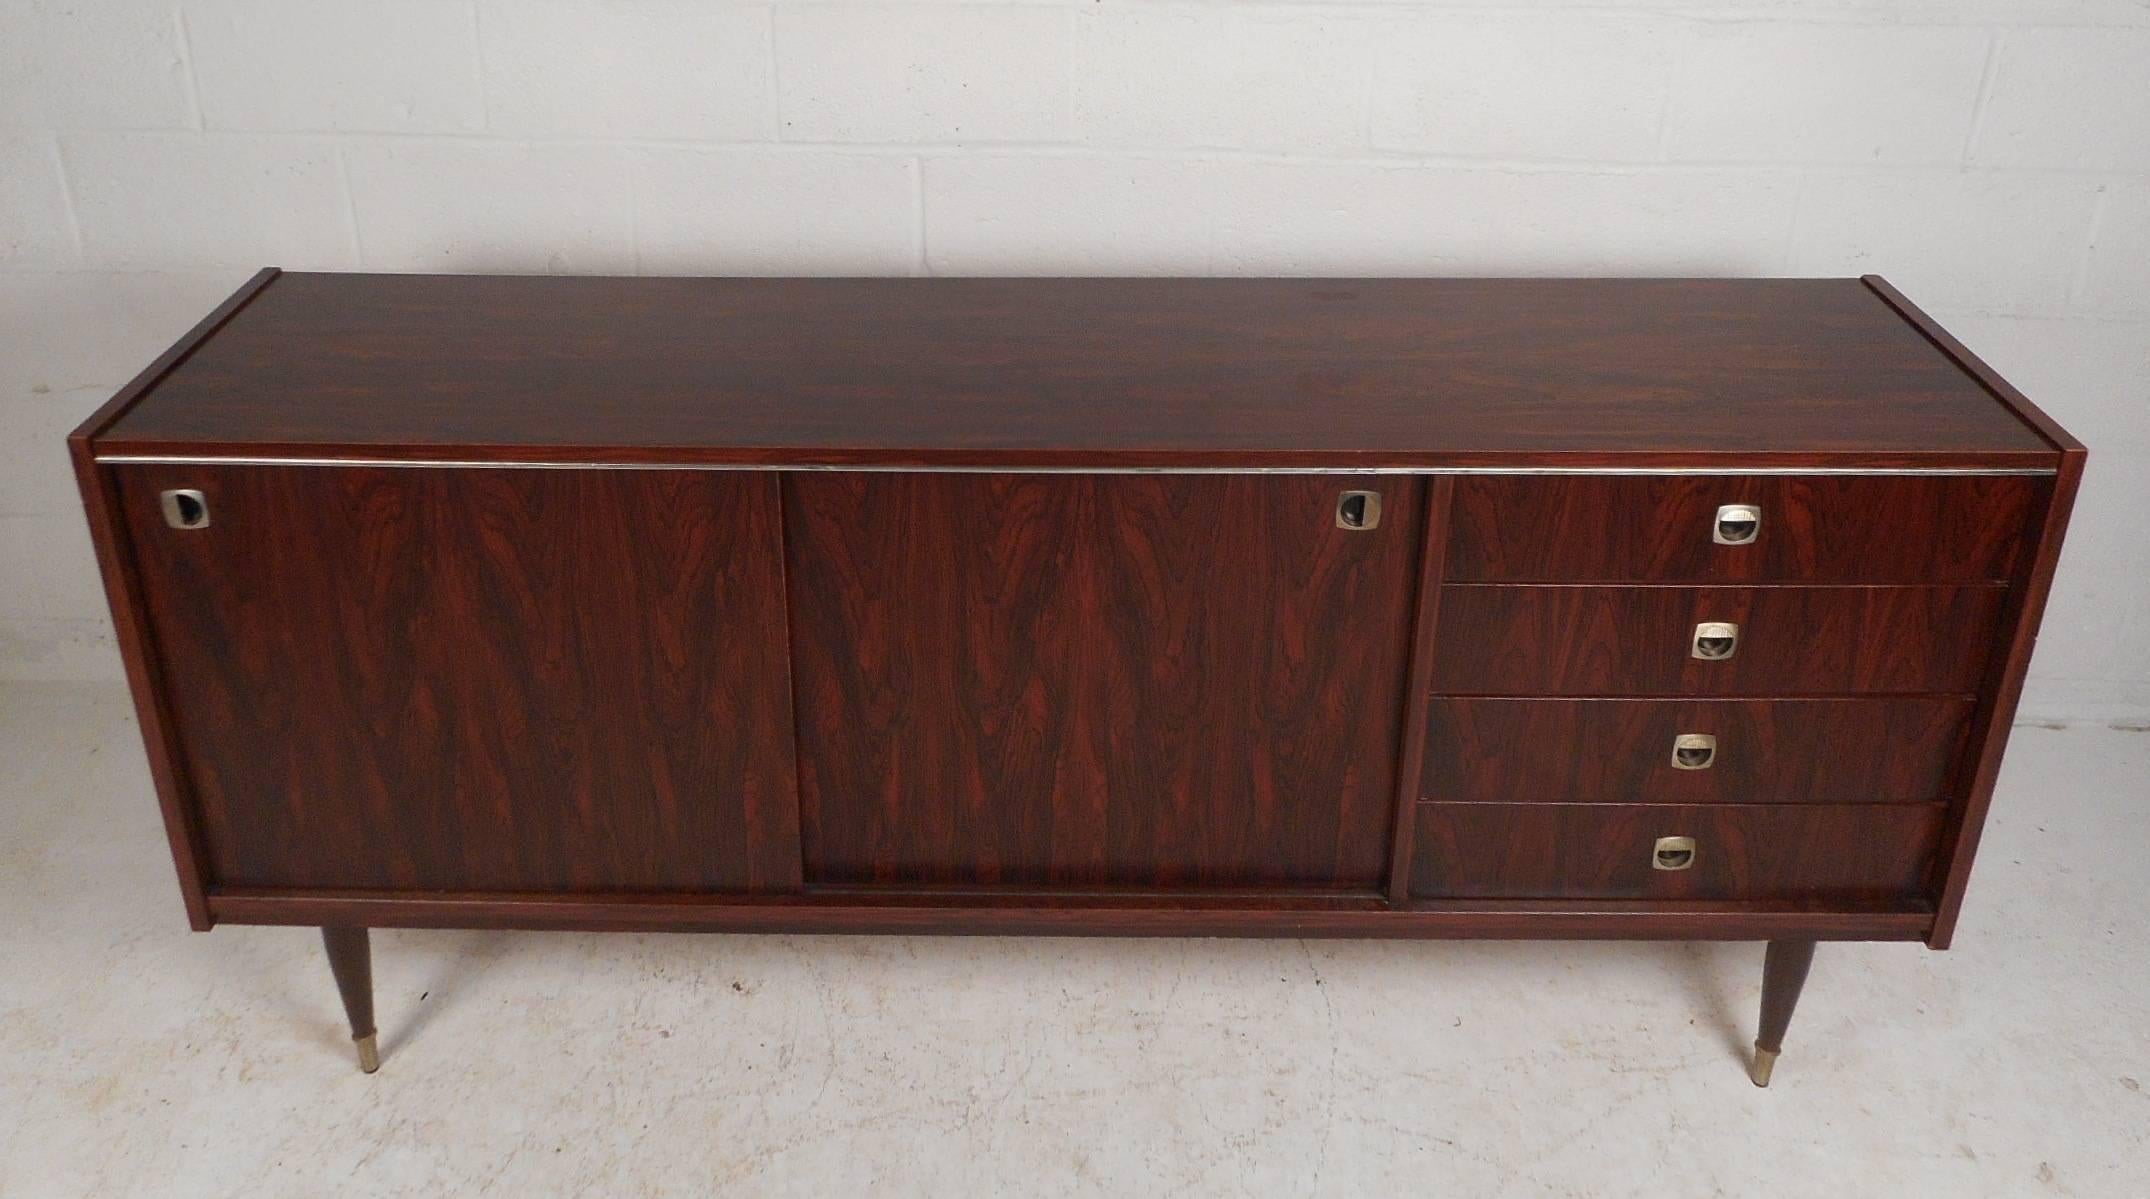 This stunning mid-century modern sideboard offers plenty of room for storage within its four hefty drawers and large storage compartments with shelves hidden behind its sliding doors. An elegant rosewood wood grain throughout and tapered legs with